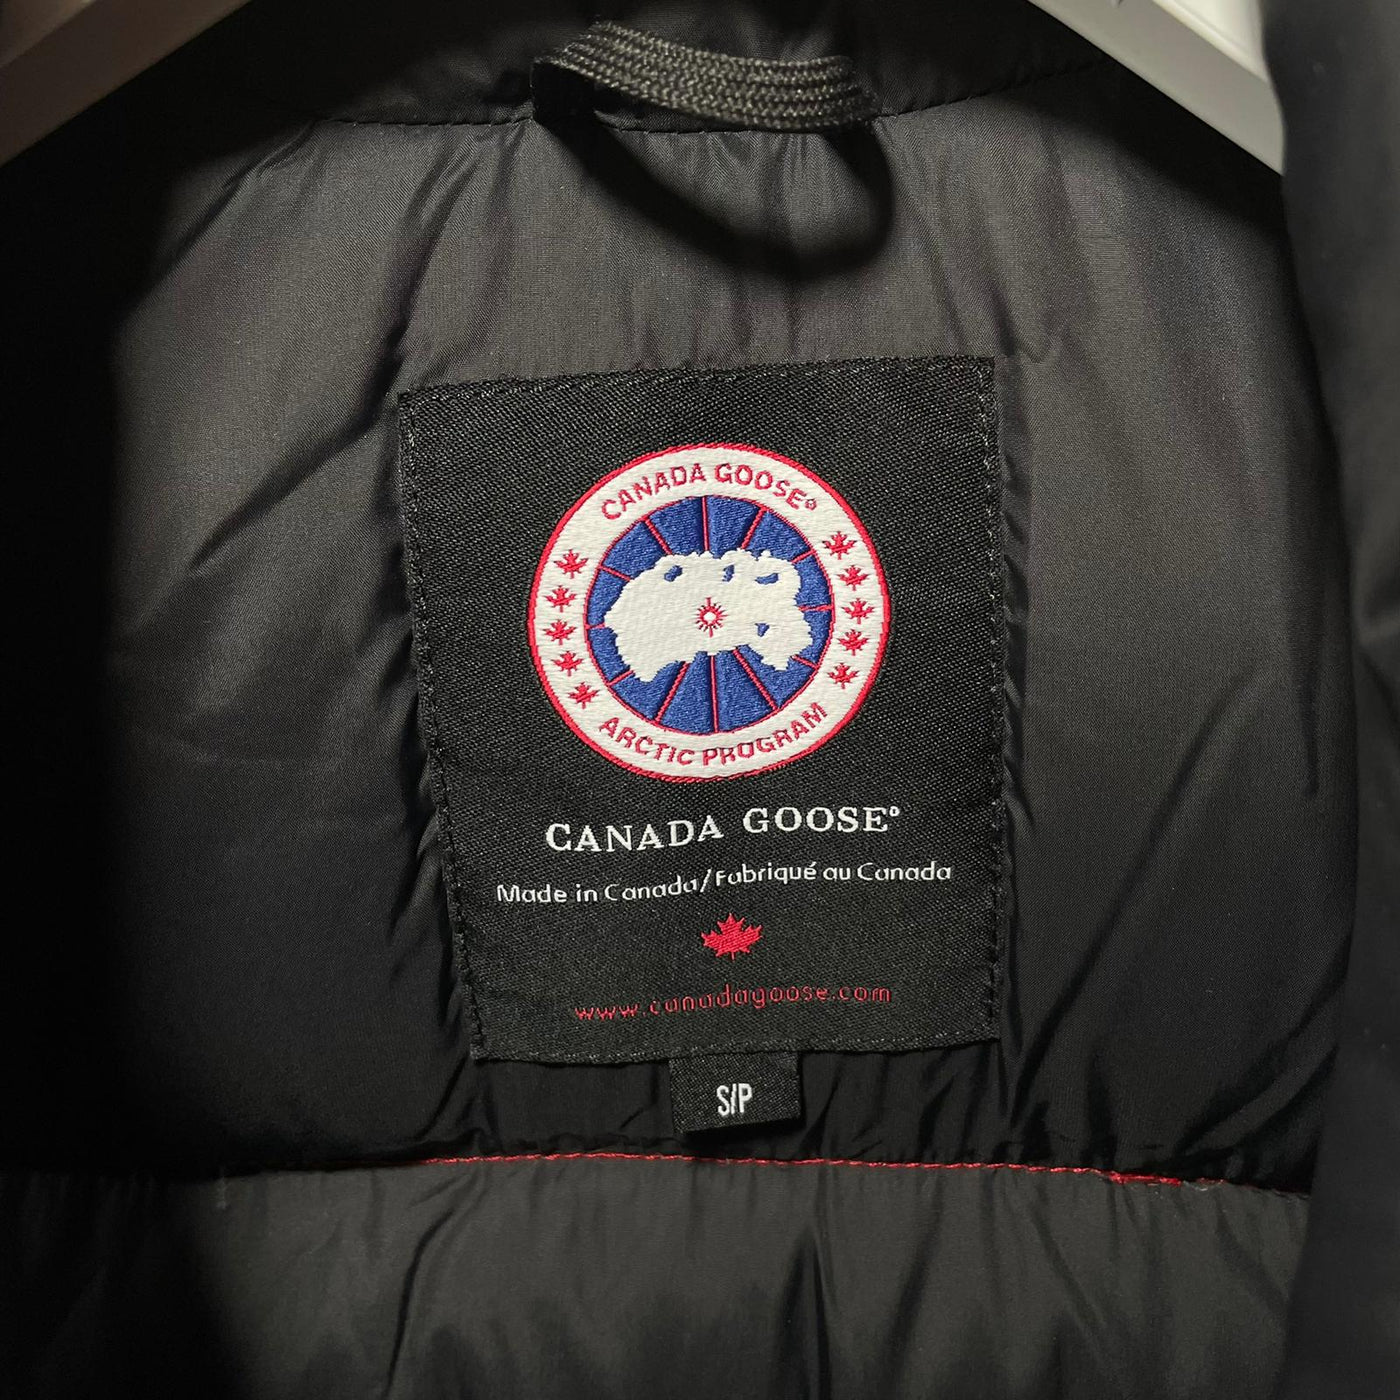 Canada Goose Freestyle Vest Red Excellent (Small)